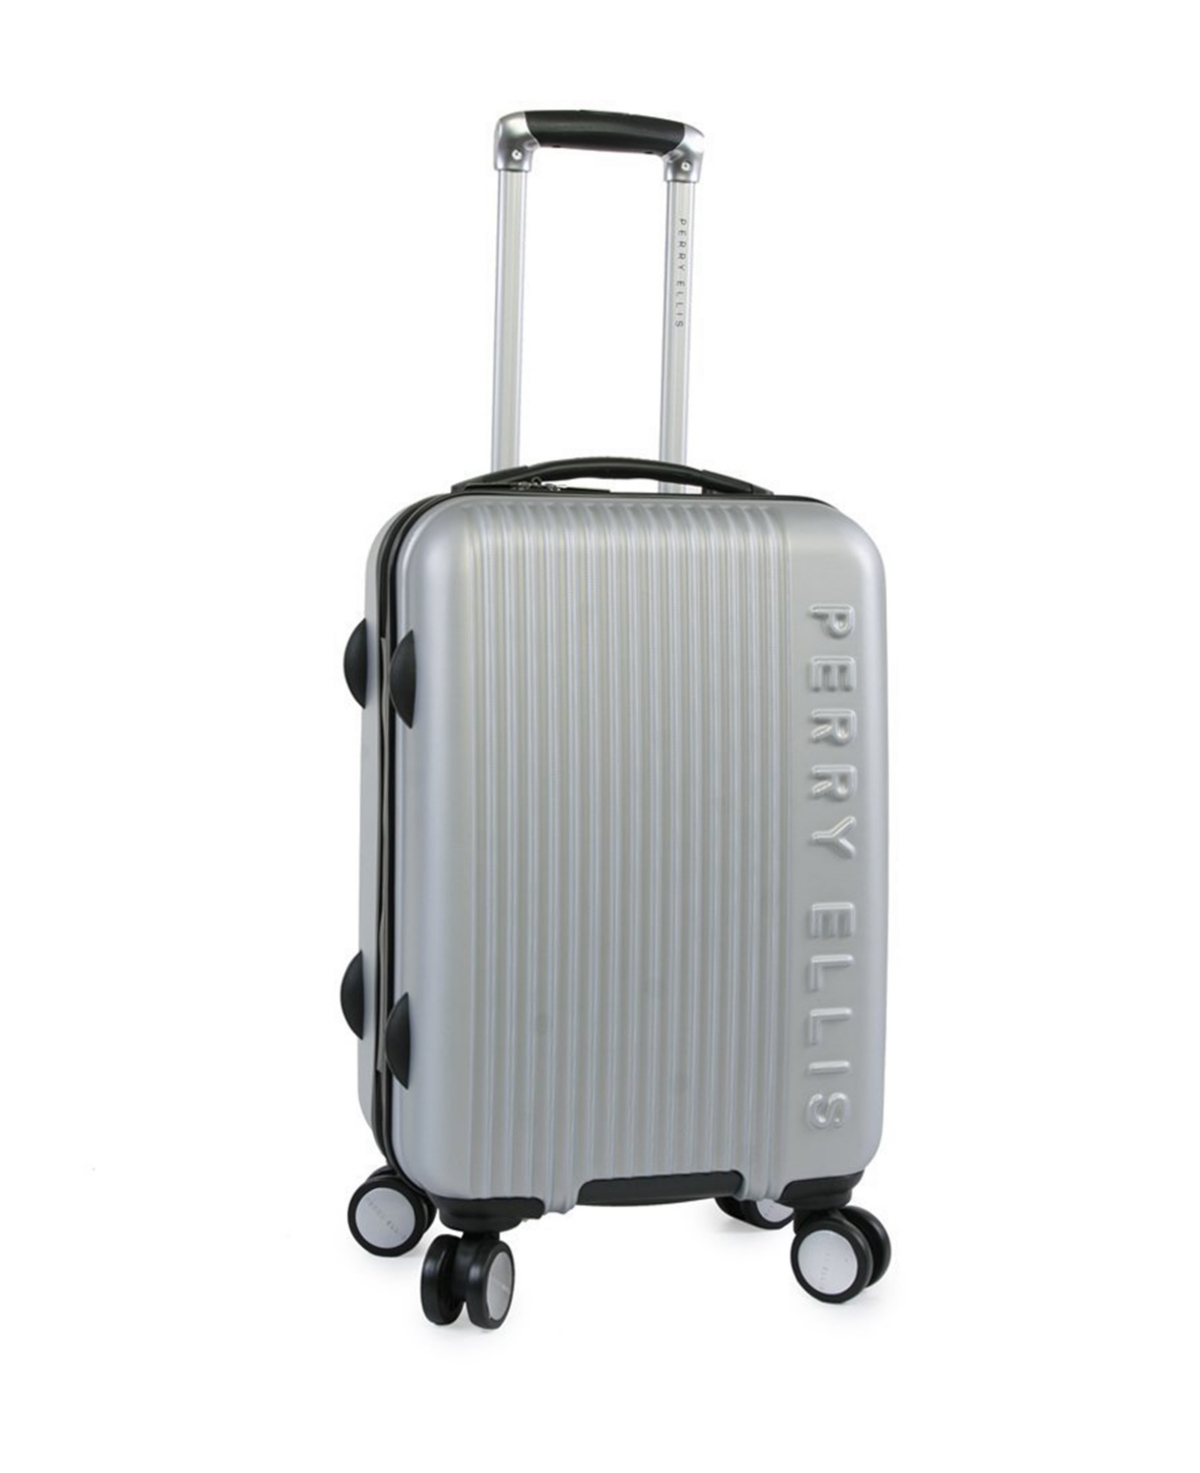 Forte 21" Spinner Luggage - Silver